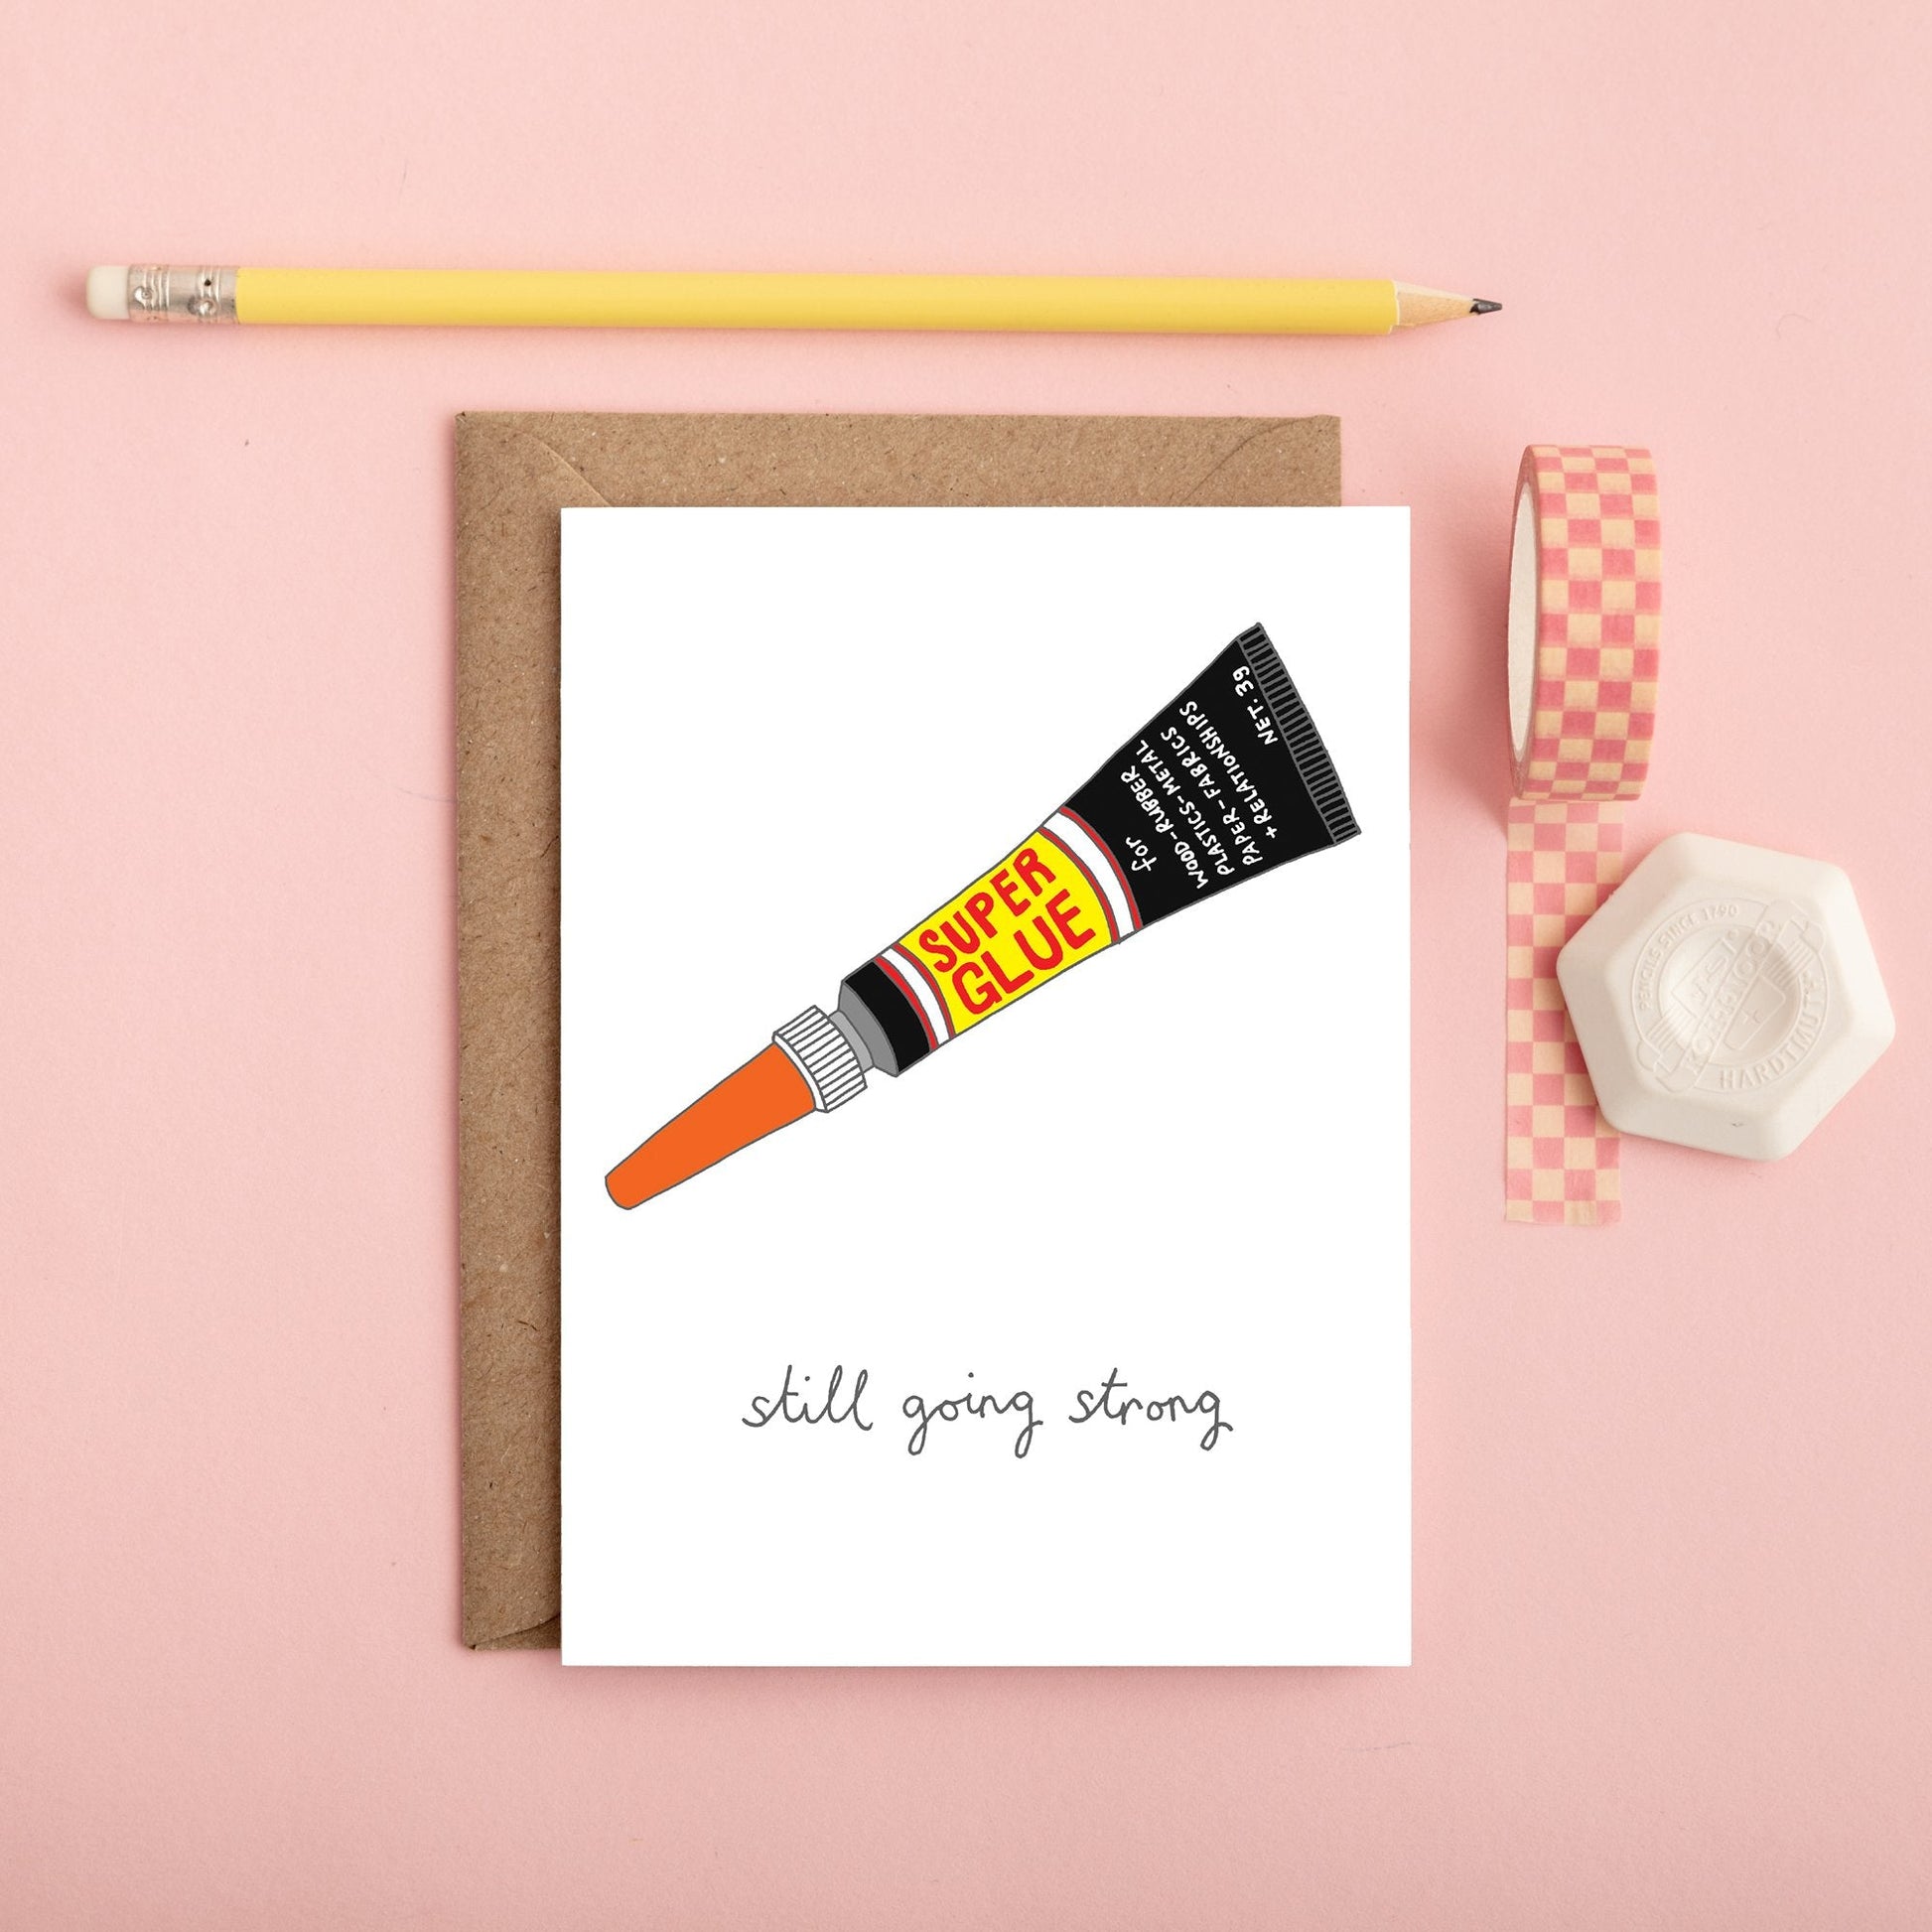 A Glue Love Card from You've Got Pen on Your Face.